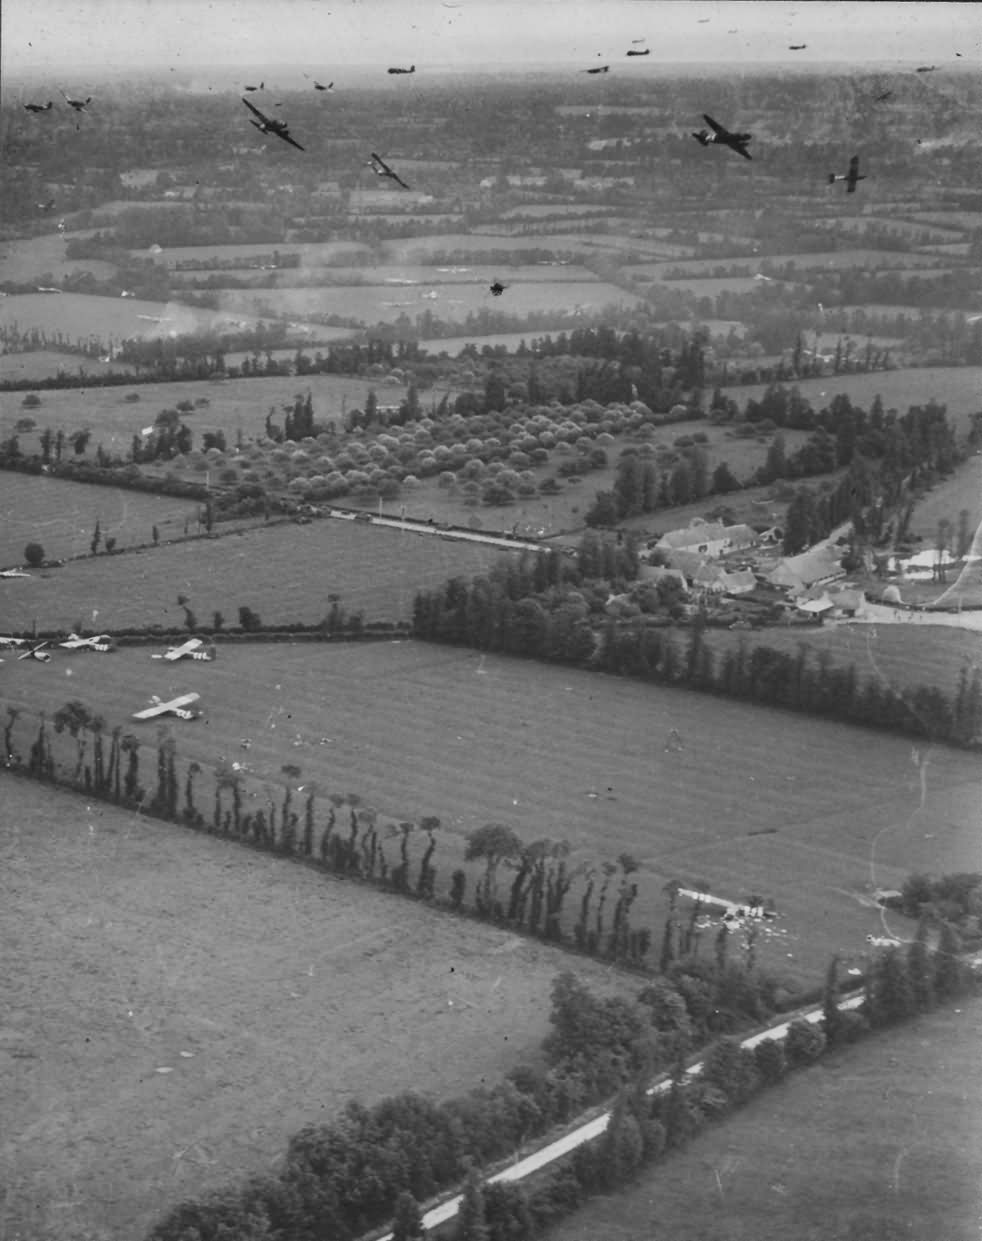 Gliders Near Cherbourg France D-Day Normandy 6 June 1944